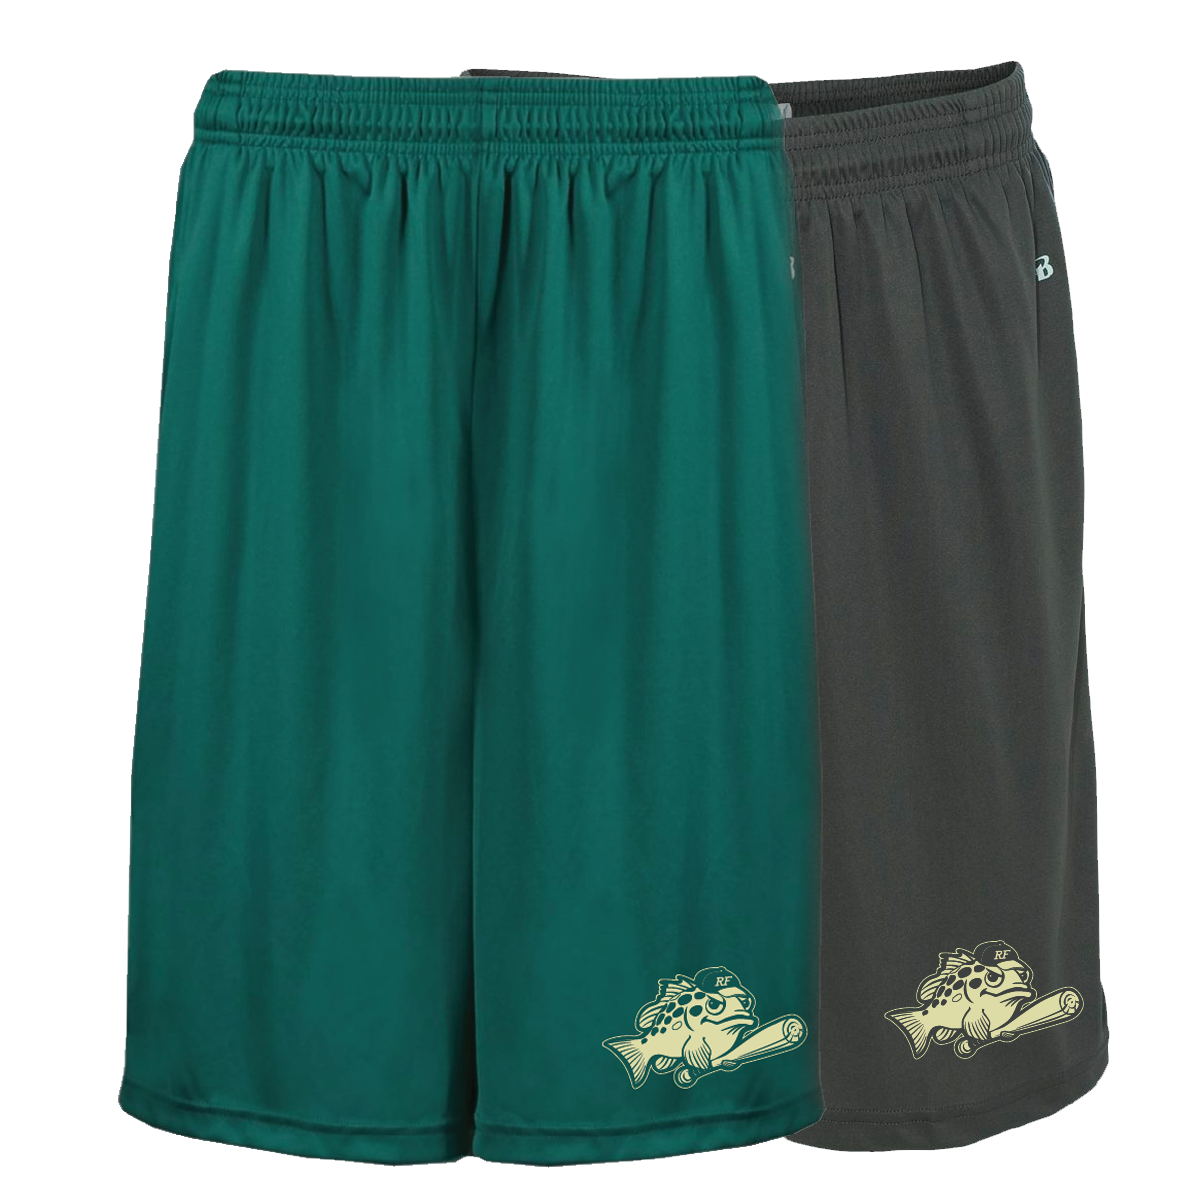 Groupers Poly Shorts